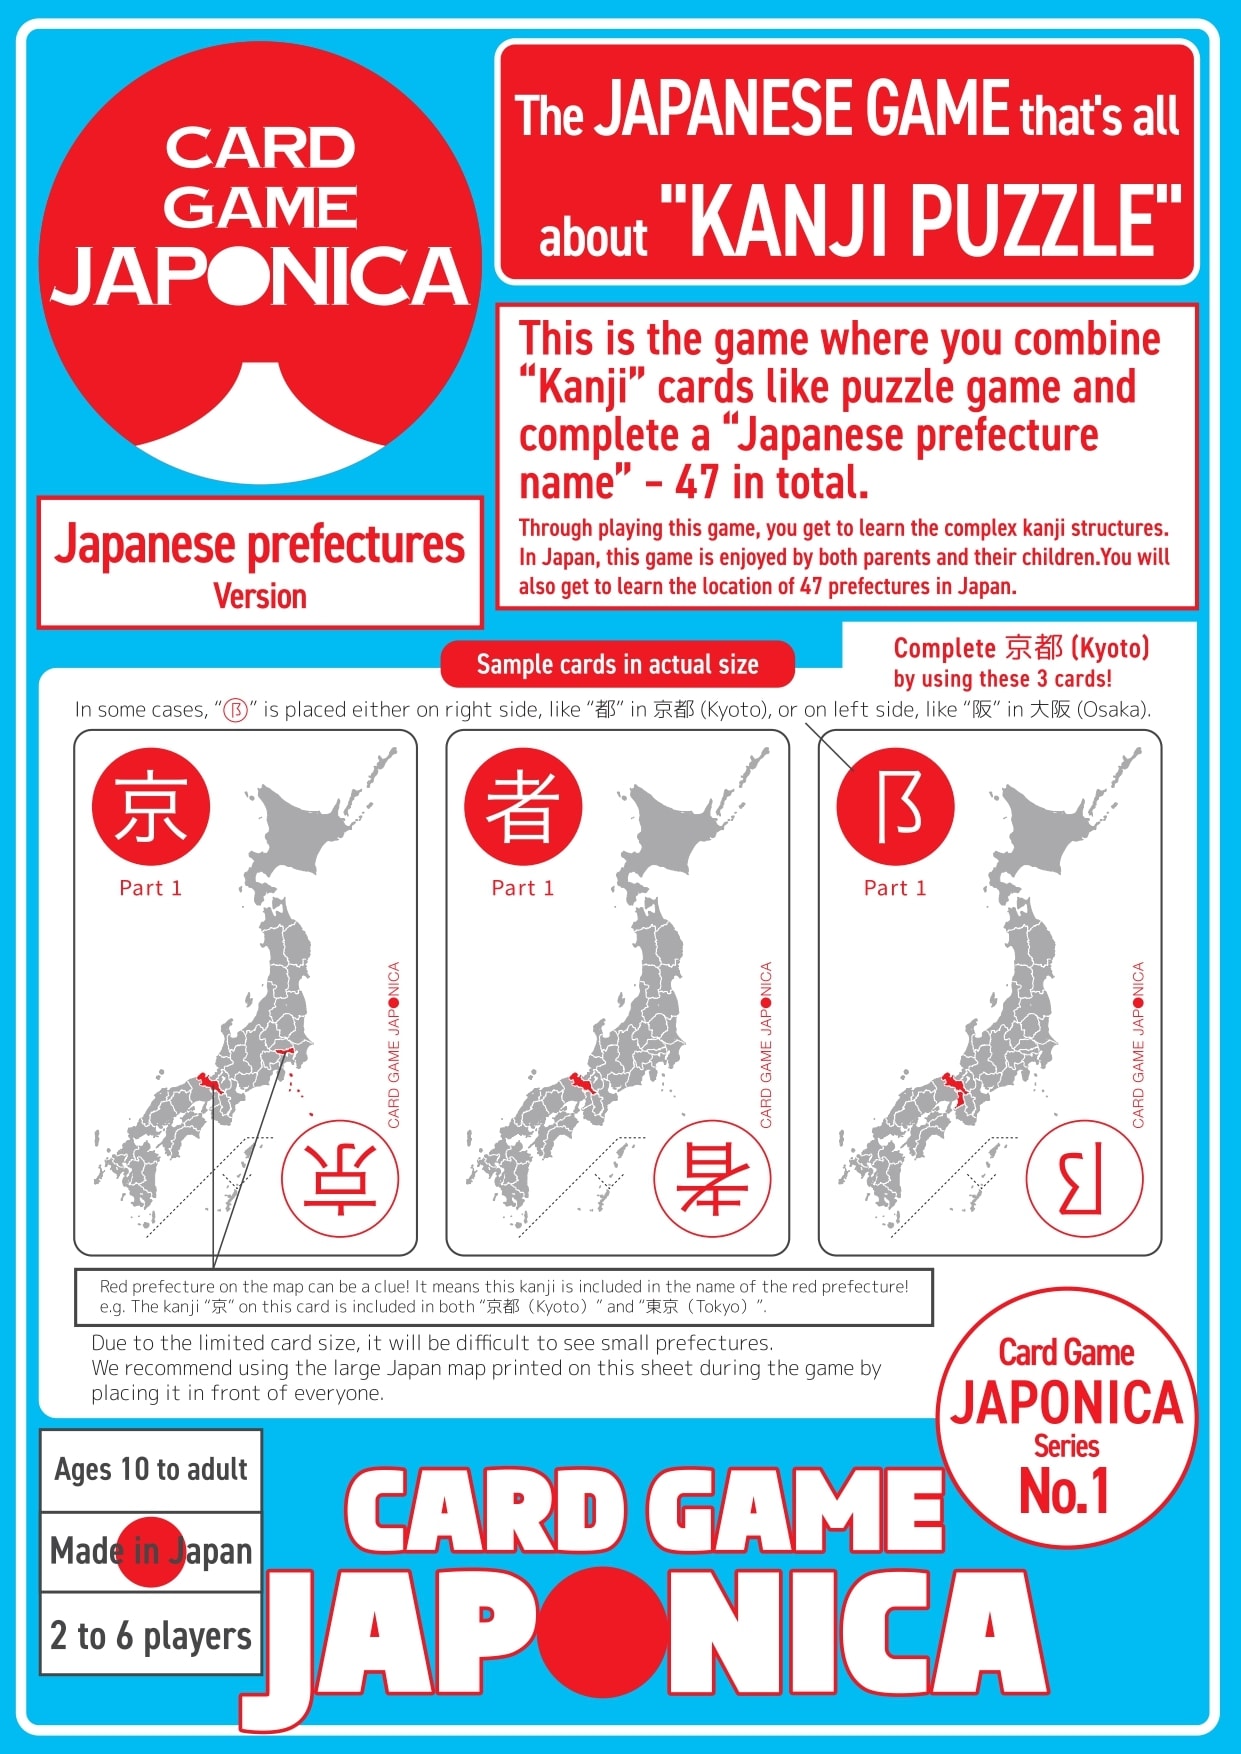 The JAPANESE GAME that's all about KANJI puzzle